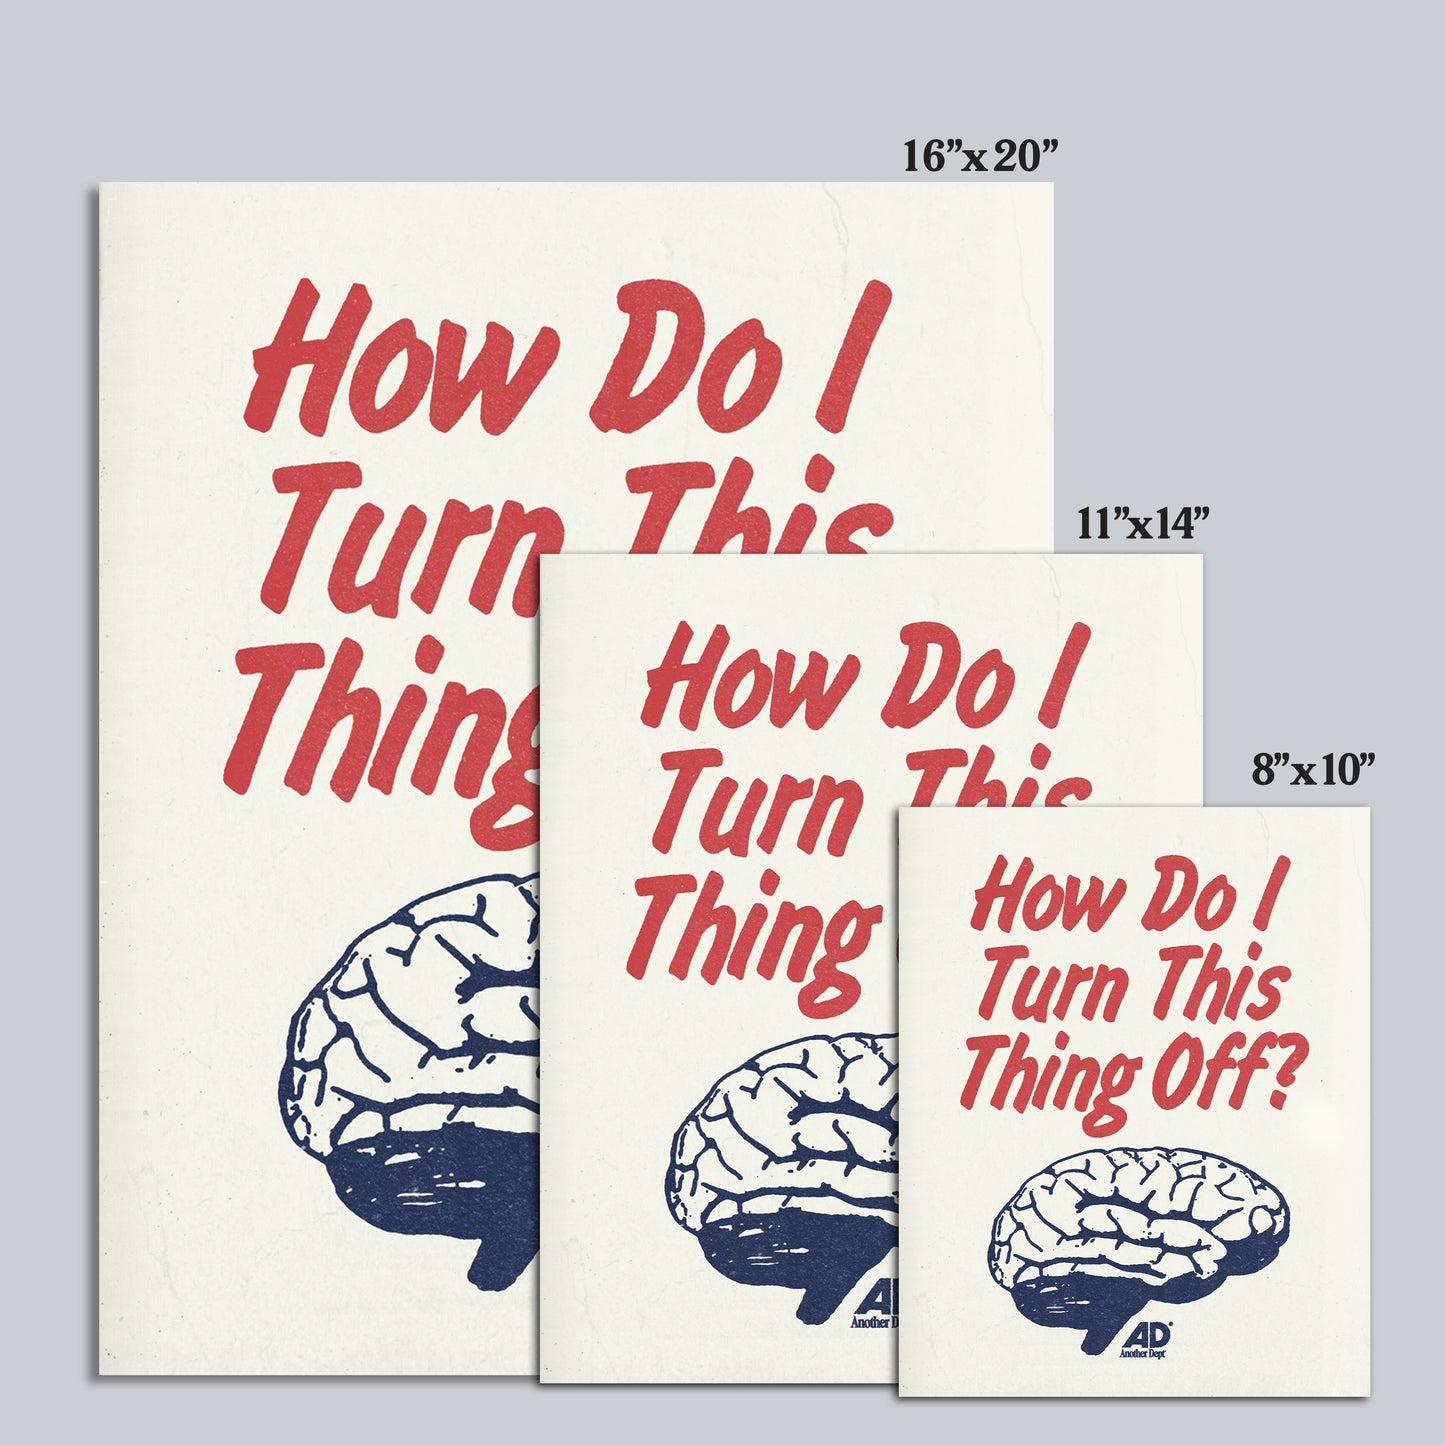 Turn This Thing Off - Print